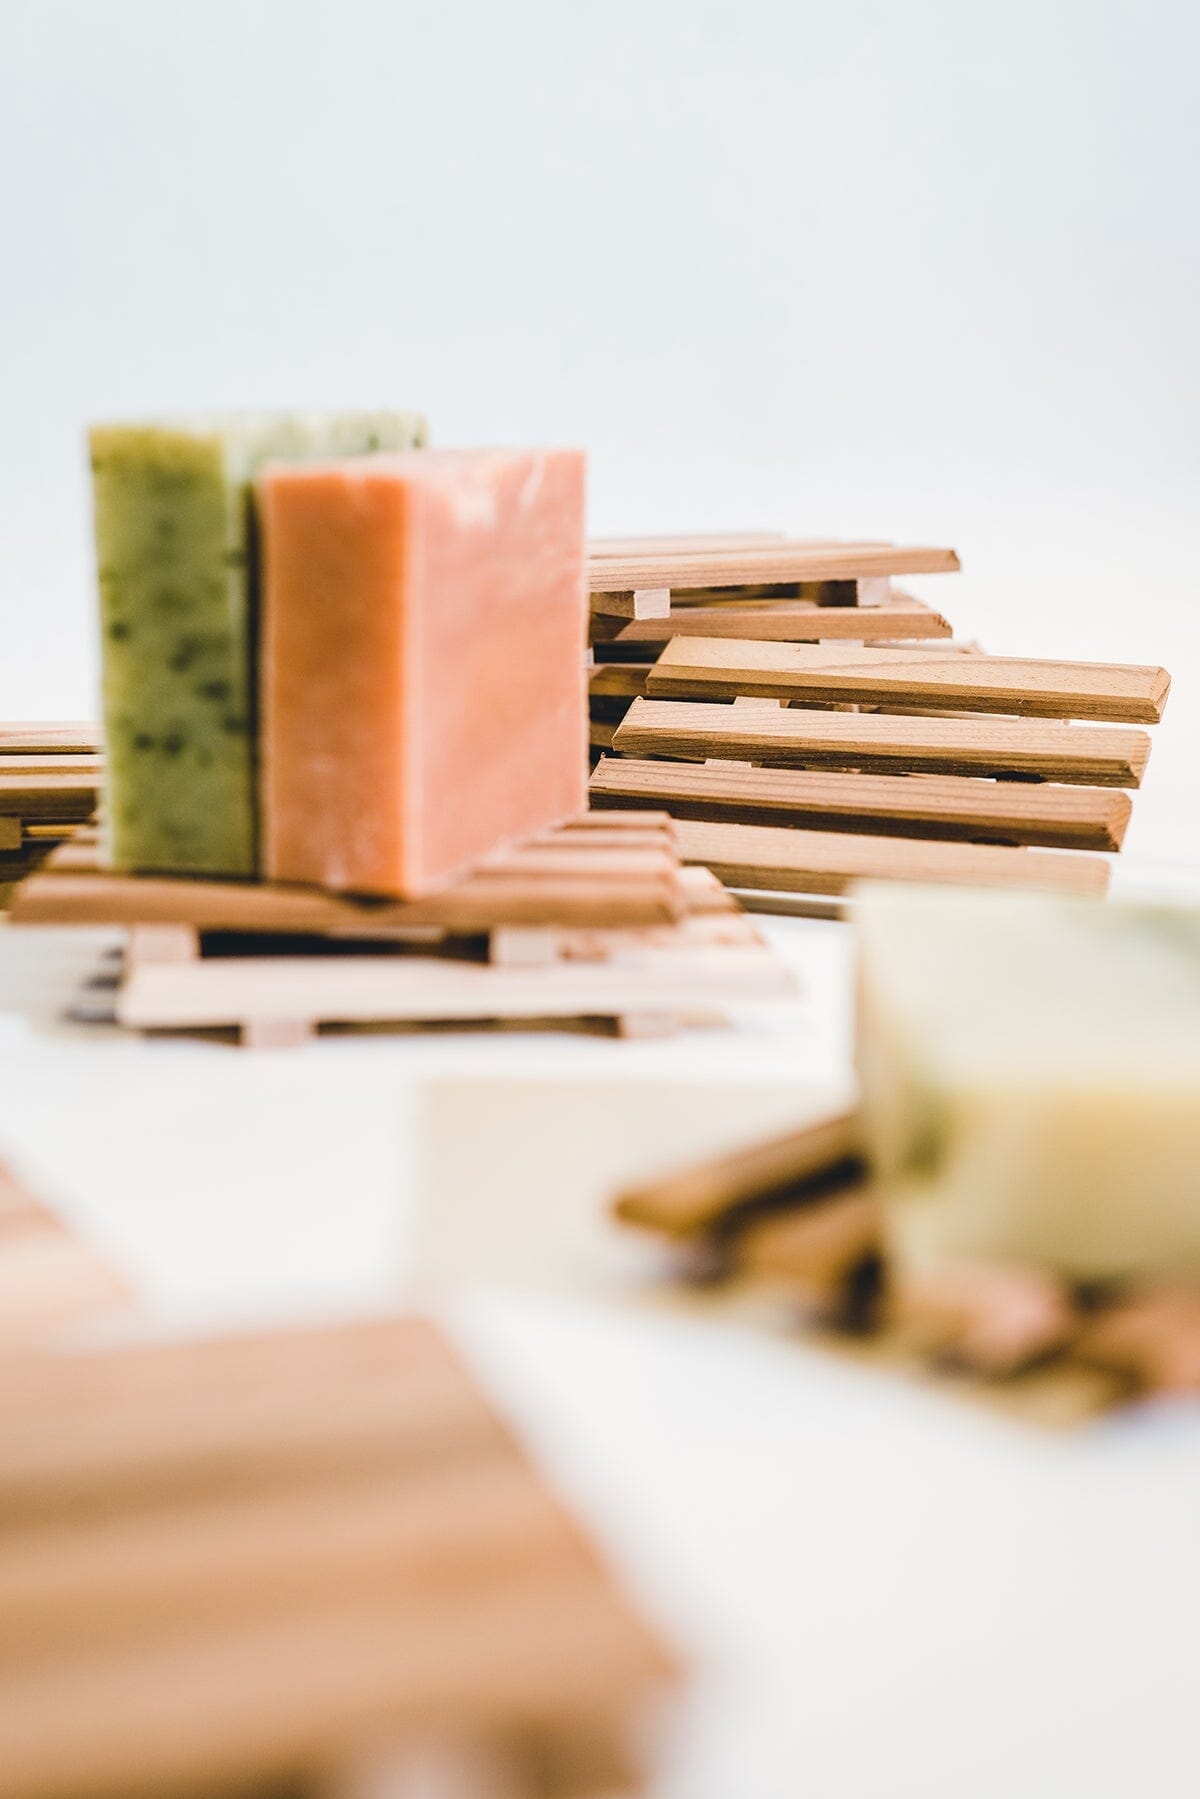 Two bars of soap from Iron Lion Soap sitting on an wooden soap tray surrounded by stacks of wood soap trays and bars of soap.